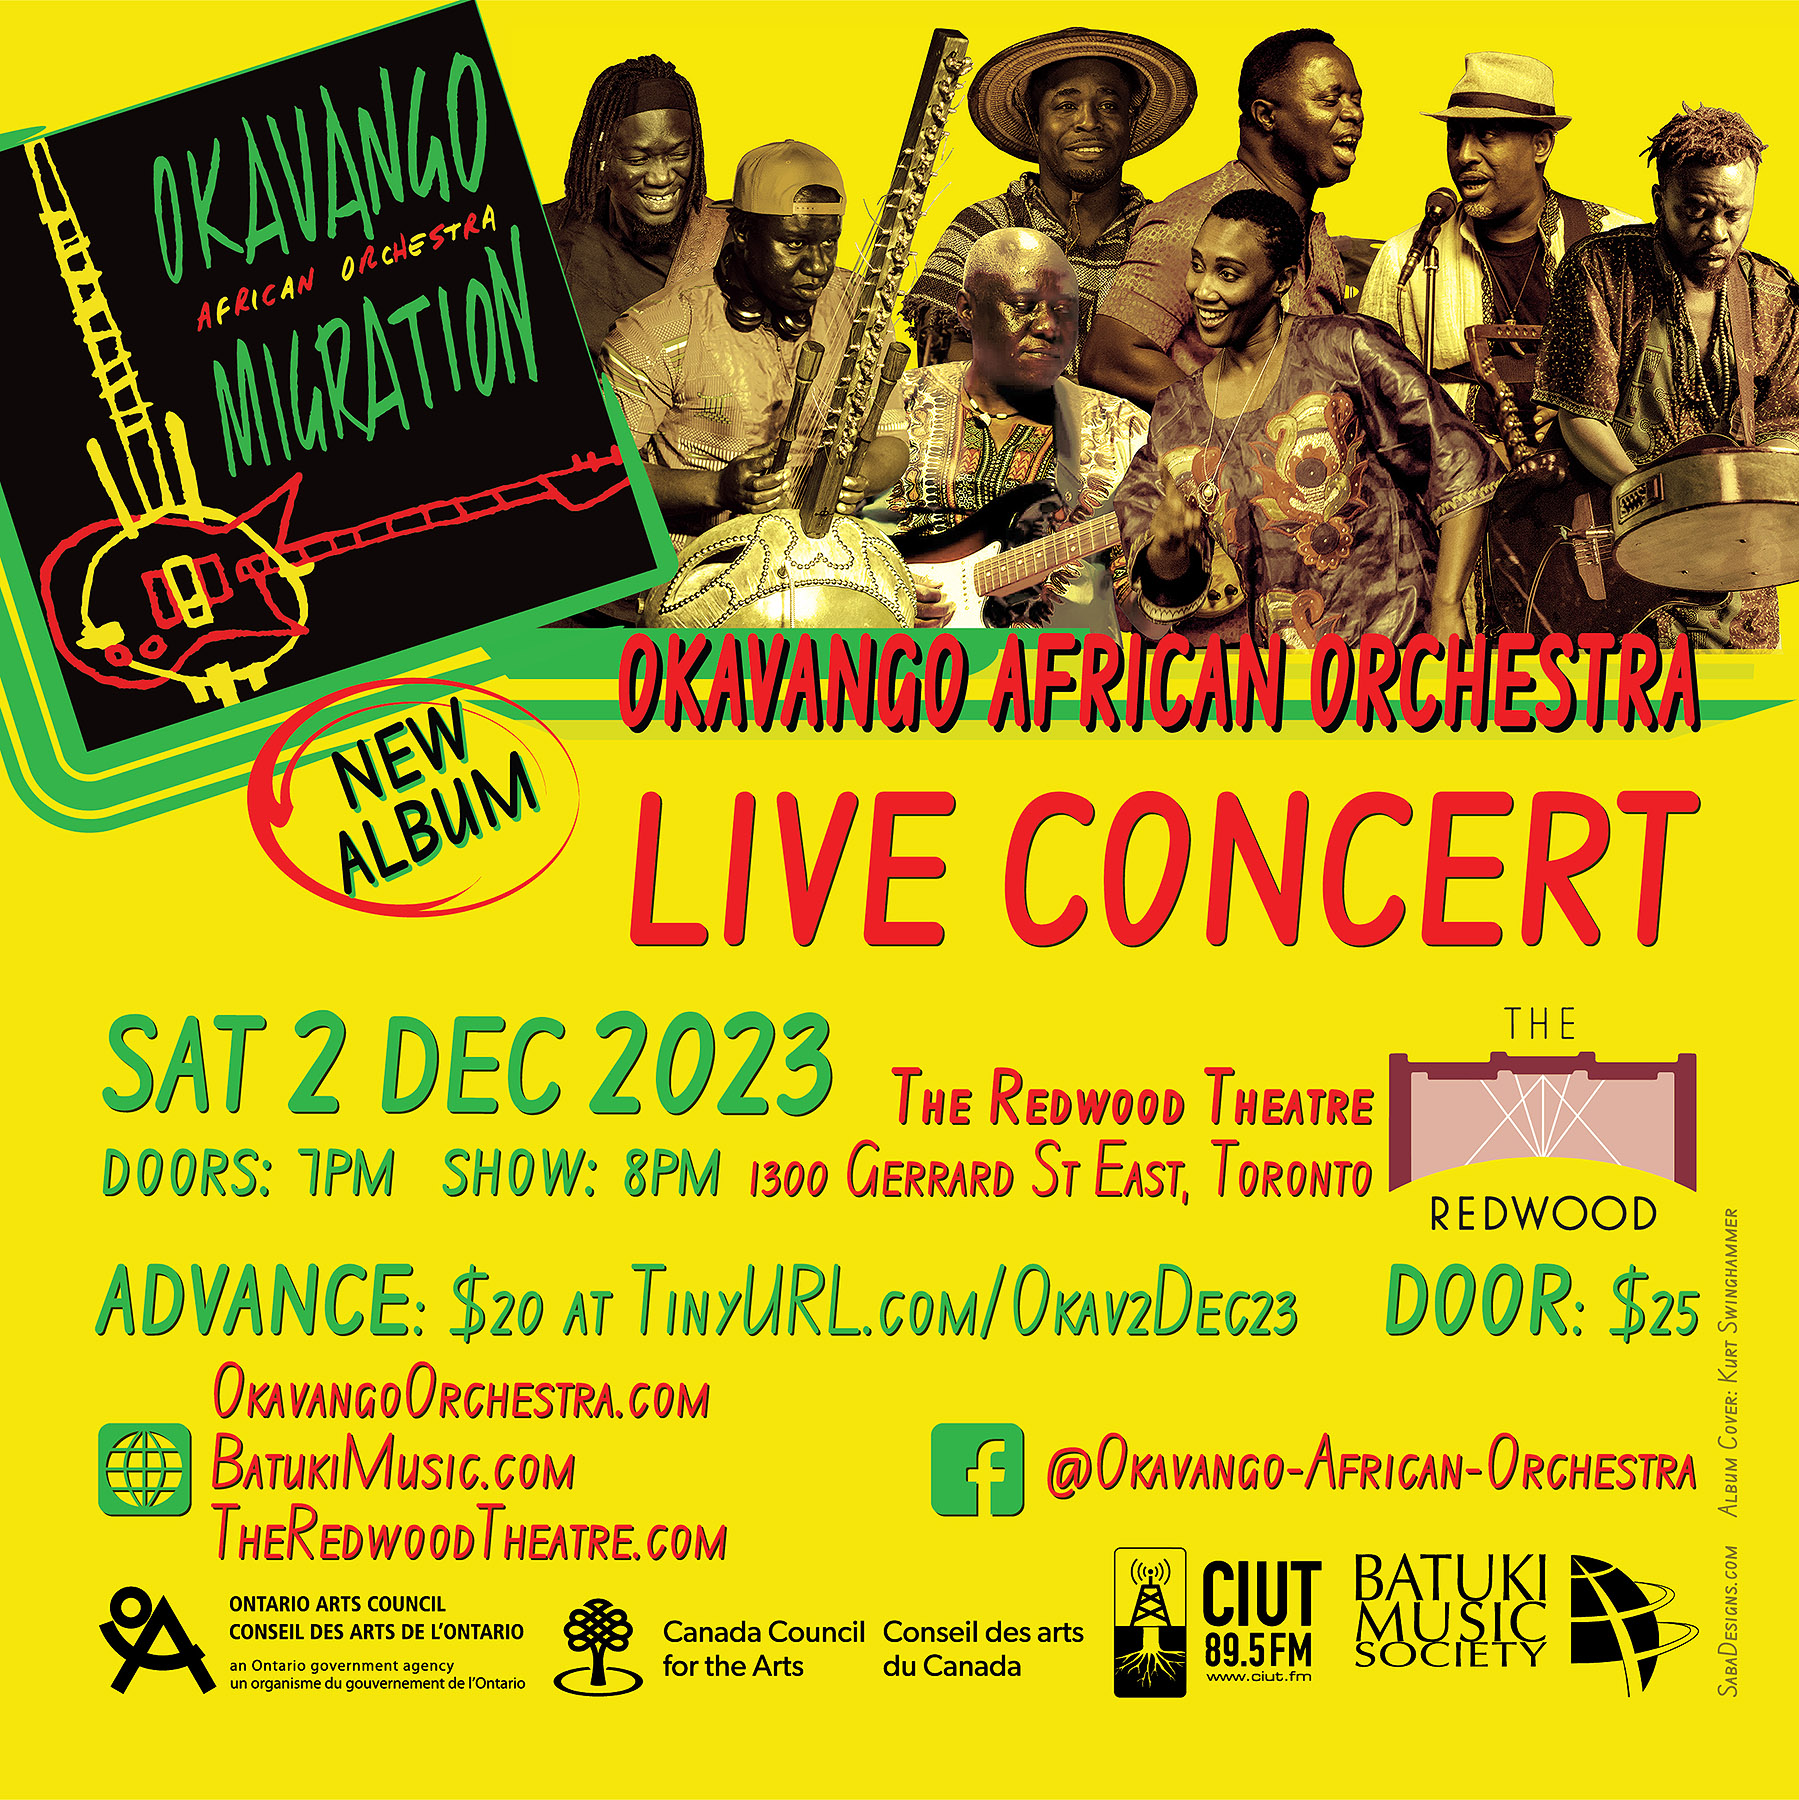 Okavango African Orchestra at the Redwood Theatre